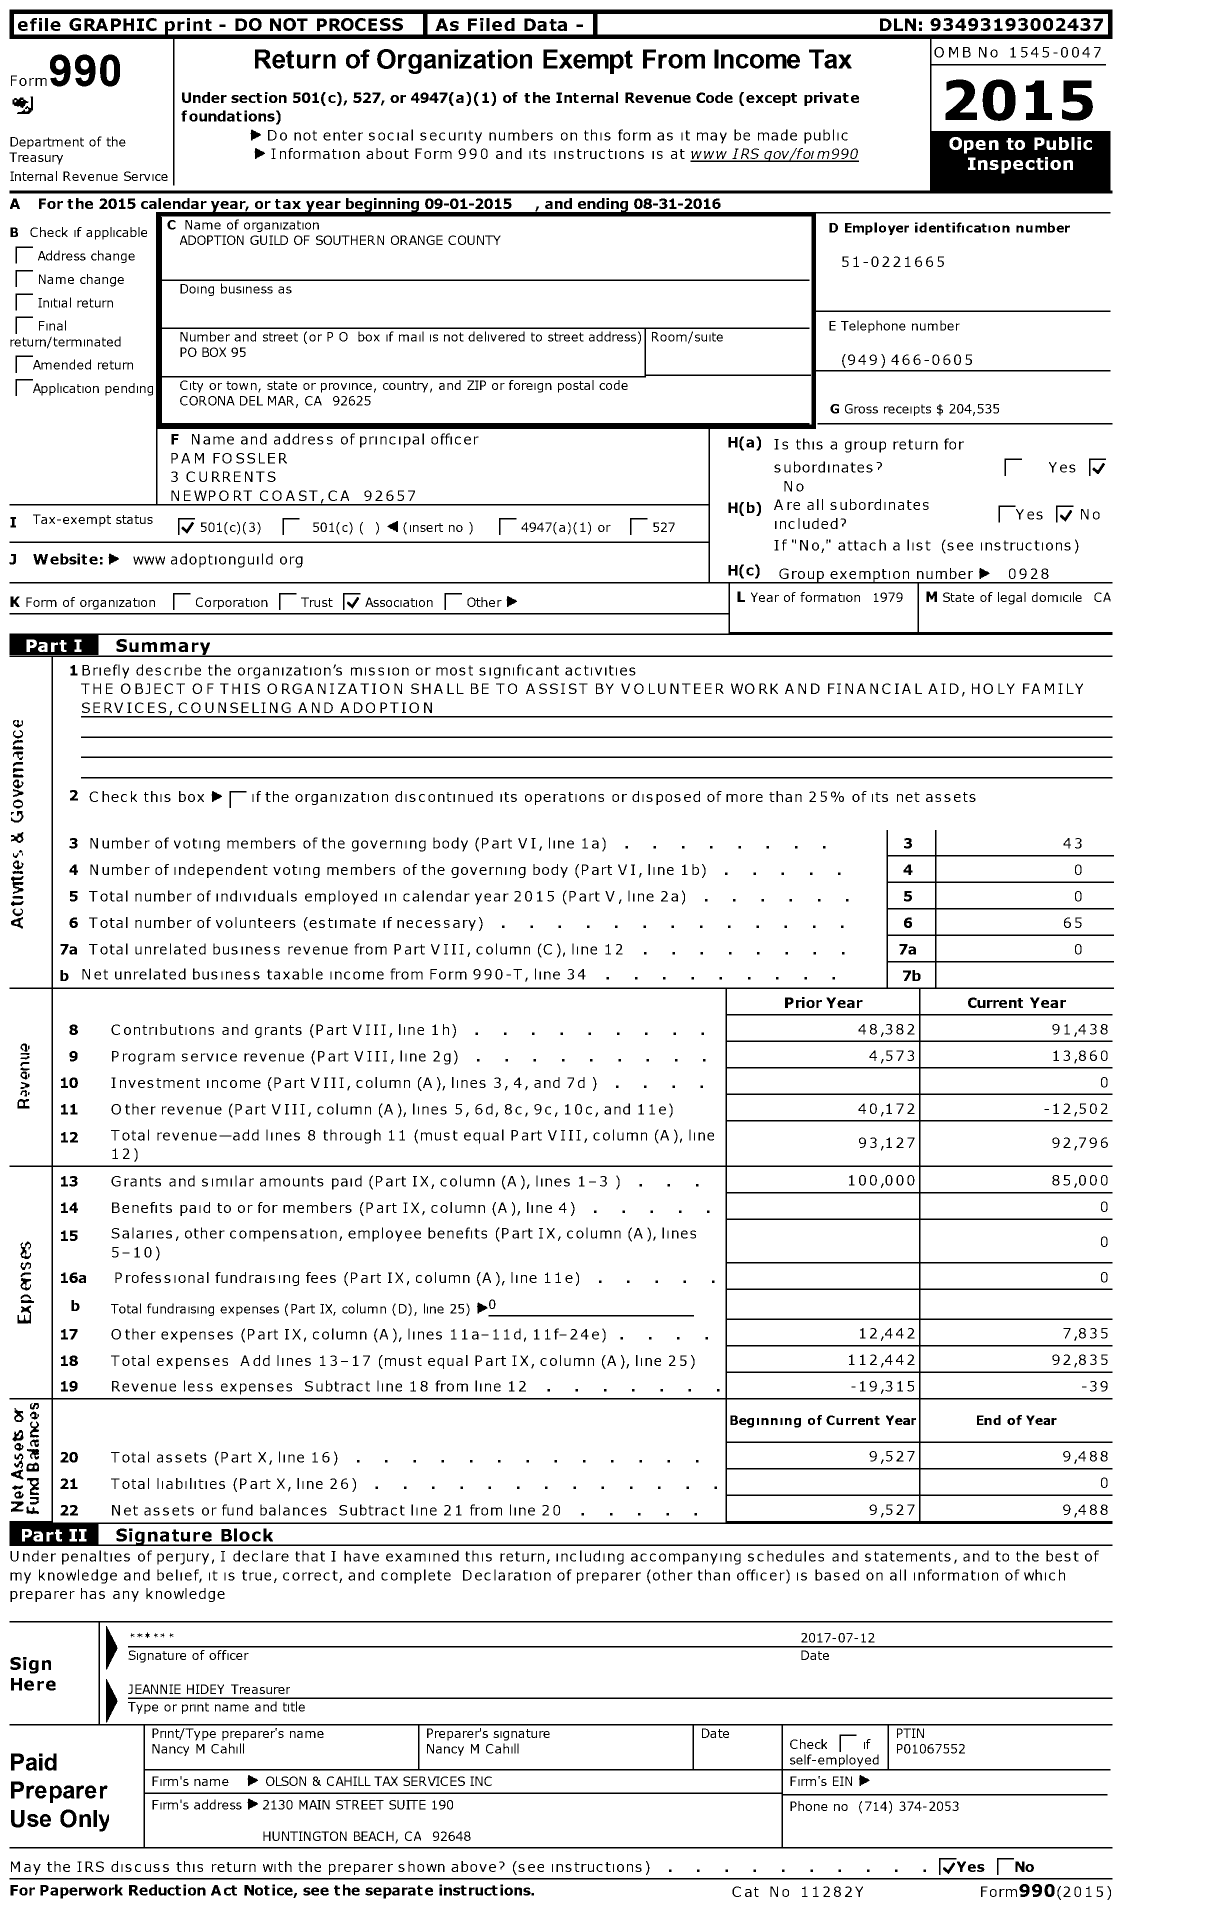 Image of first page of 2015 Form 990 for Adoption Guild of Southern Orange County